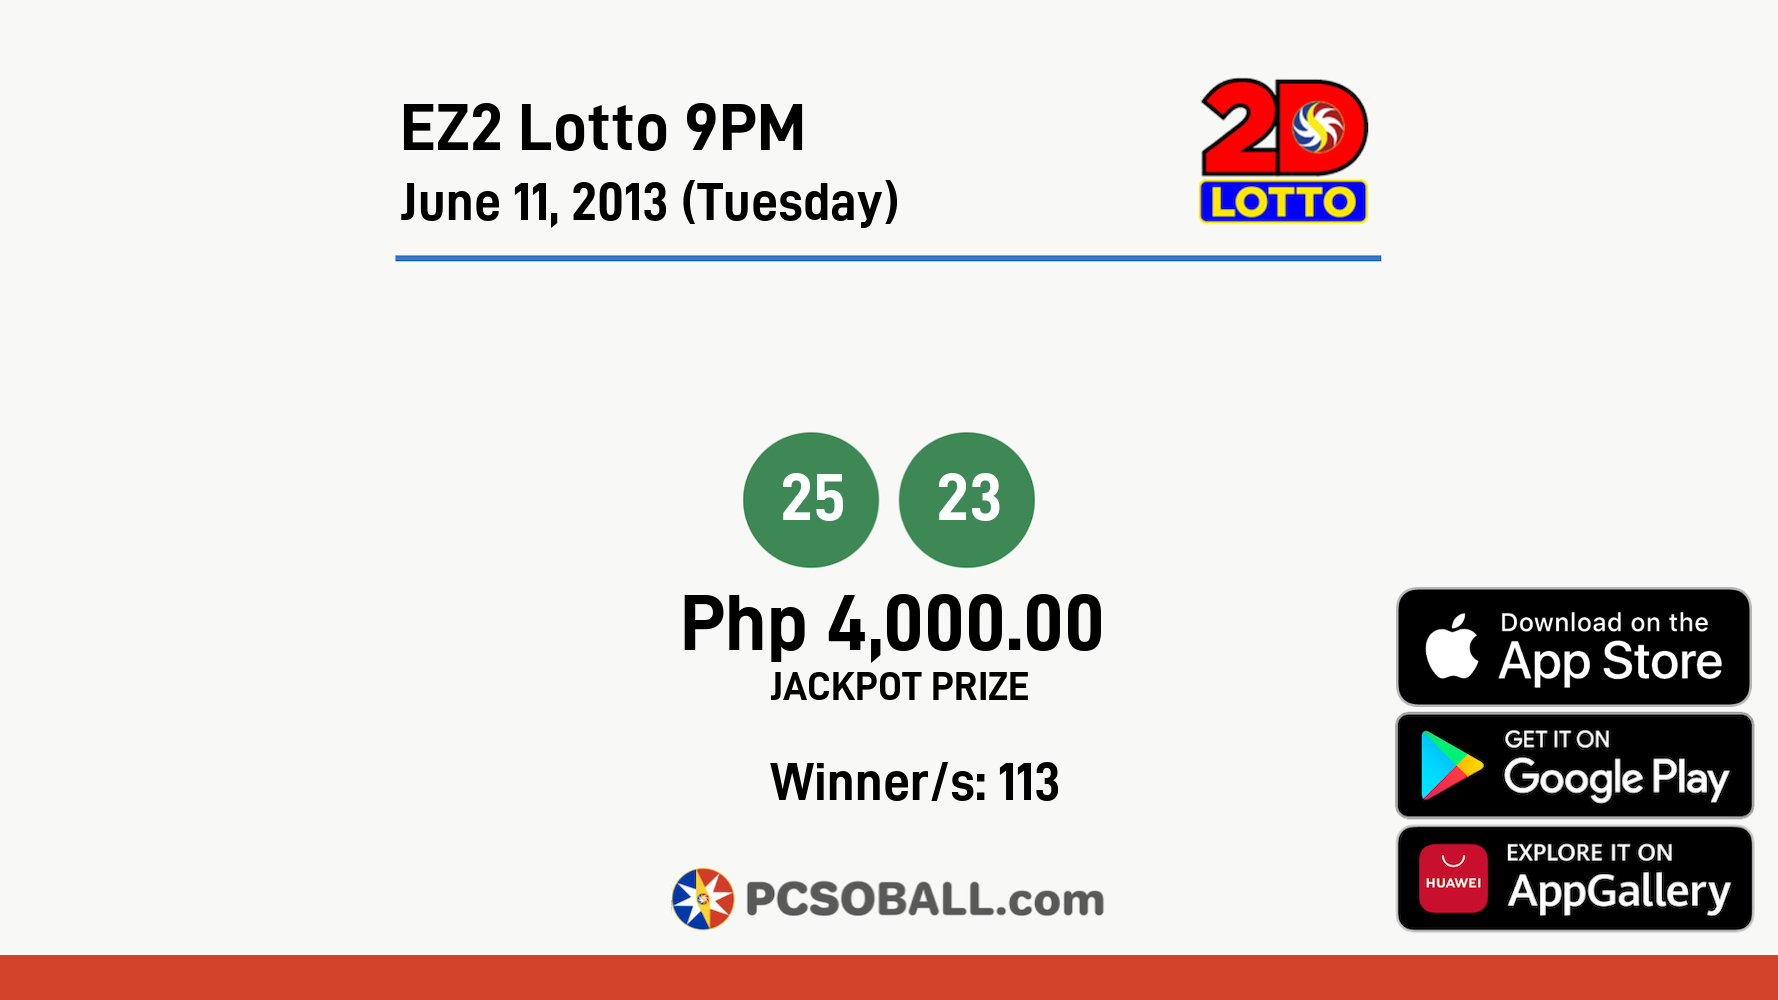 EZ2 Lotto 9PM June 11, 2013 (Tuesday) Result